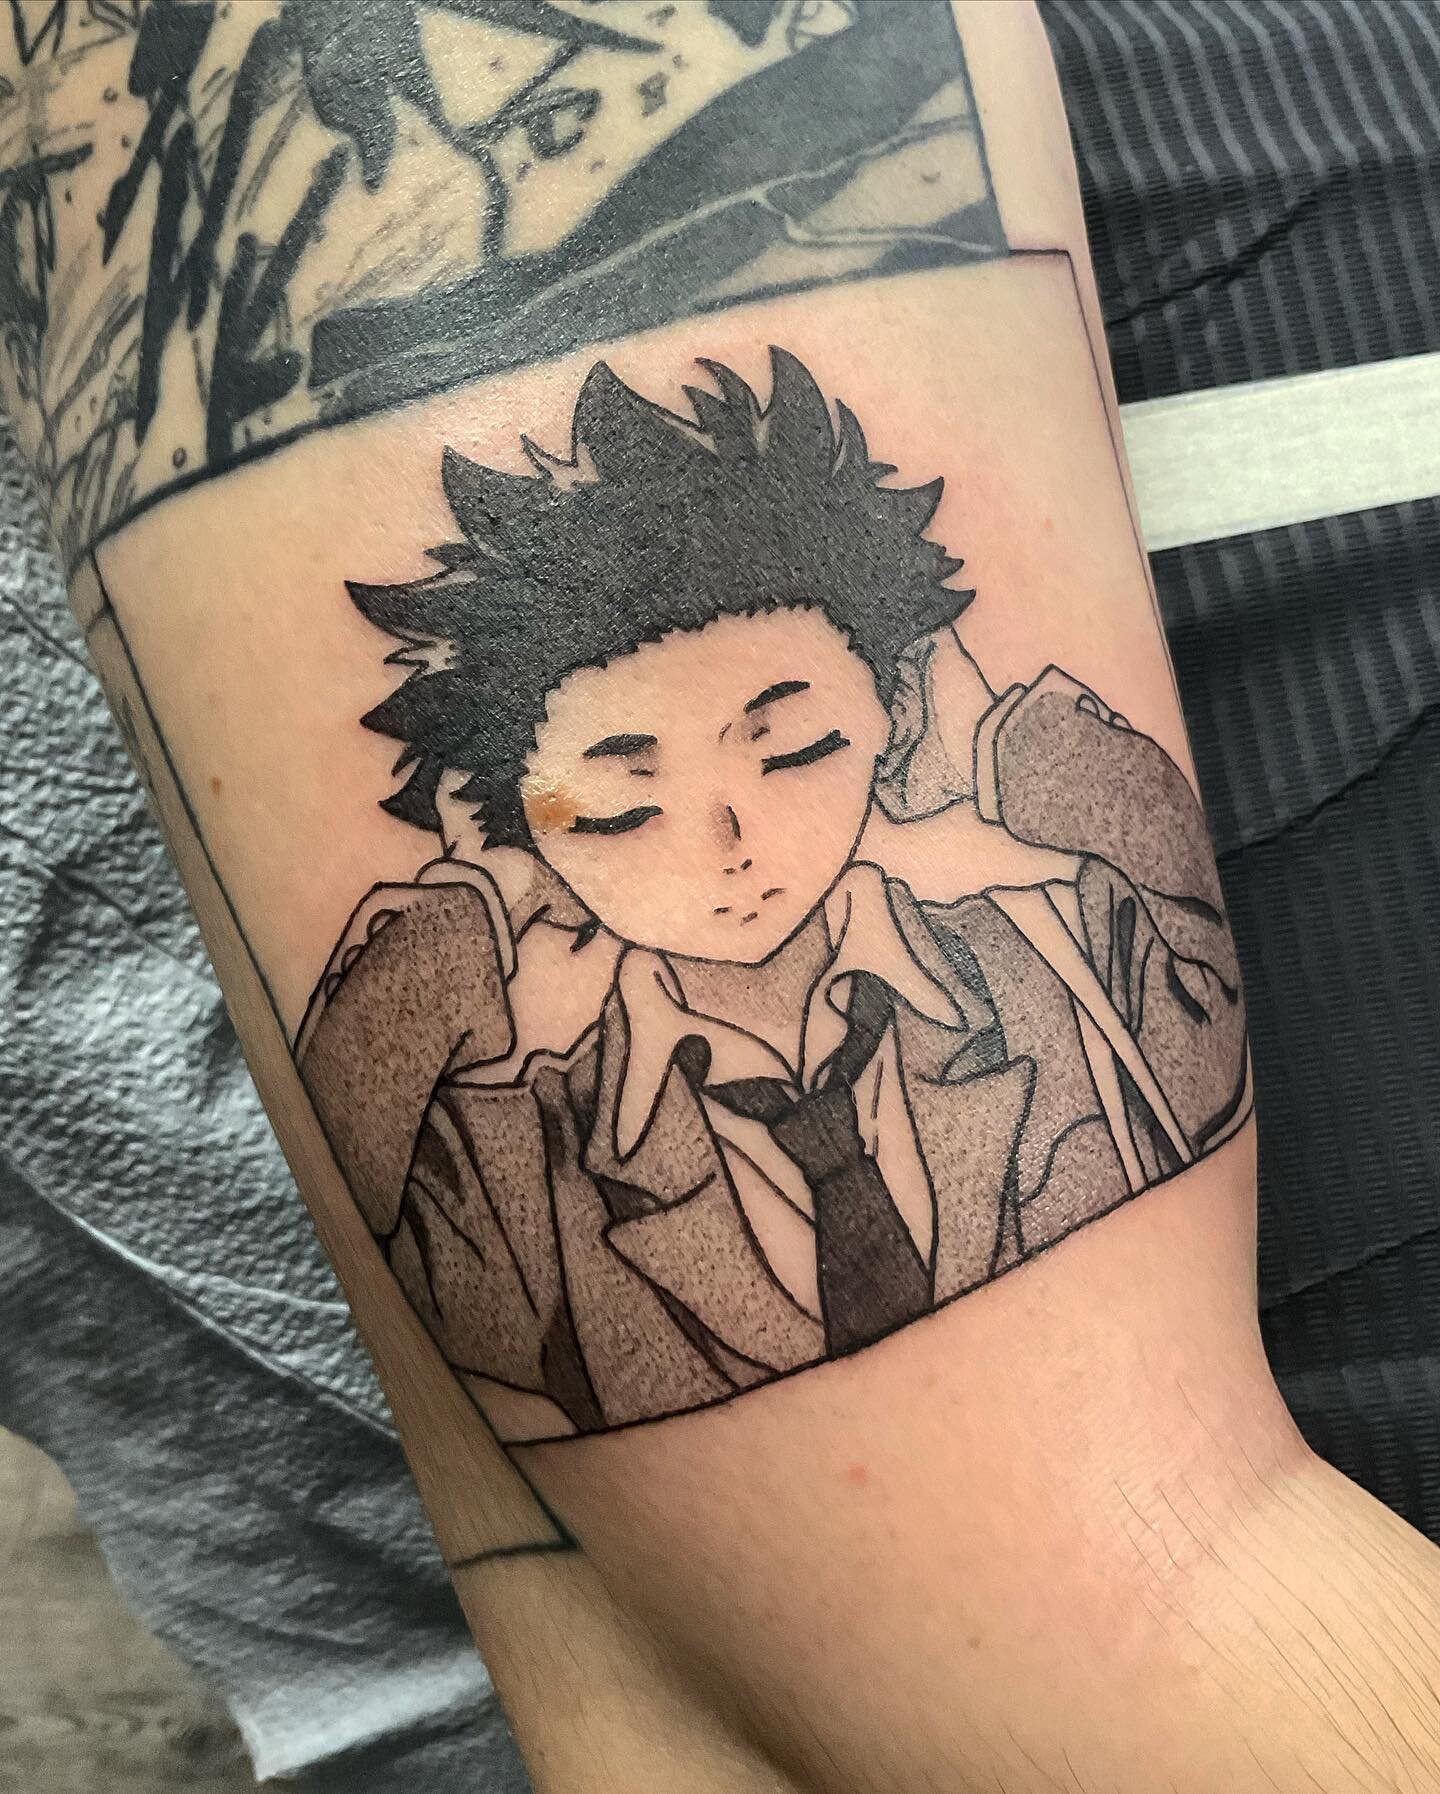 KyoAni has been my favorite studio for a long time I got this a few years  back because I love A Silent Voice and was so happy my favorite studio  animated it